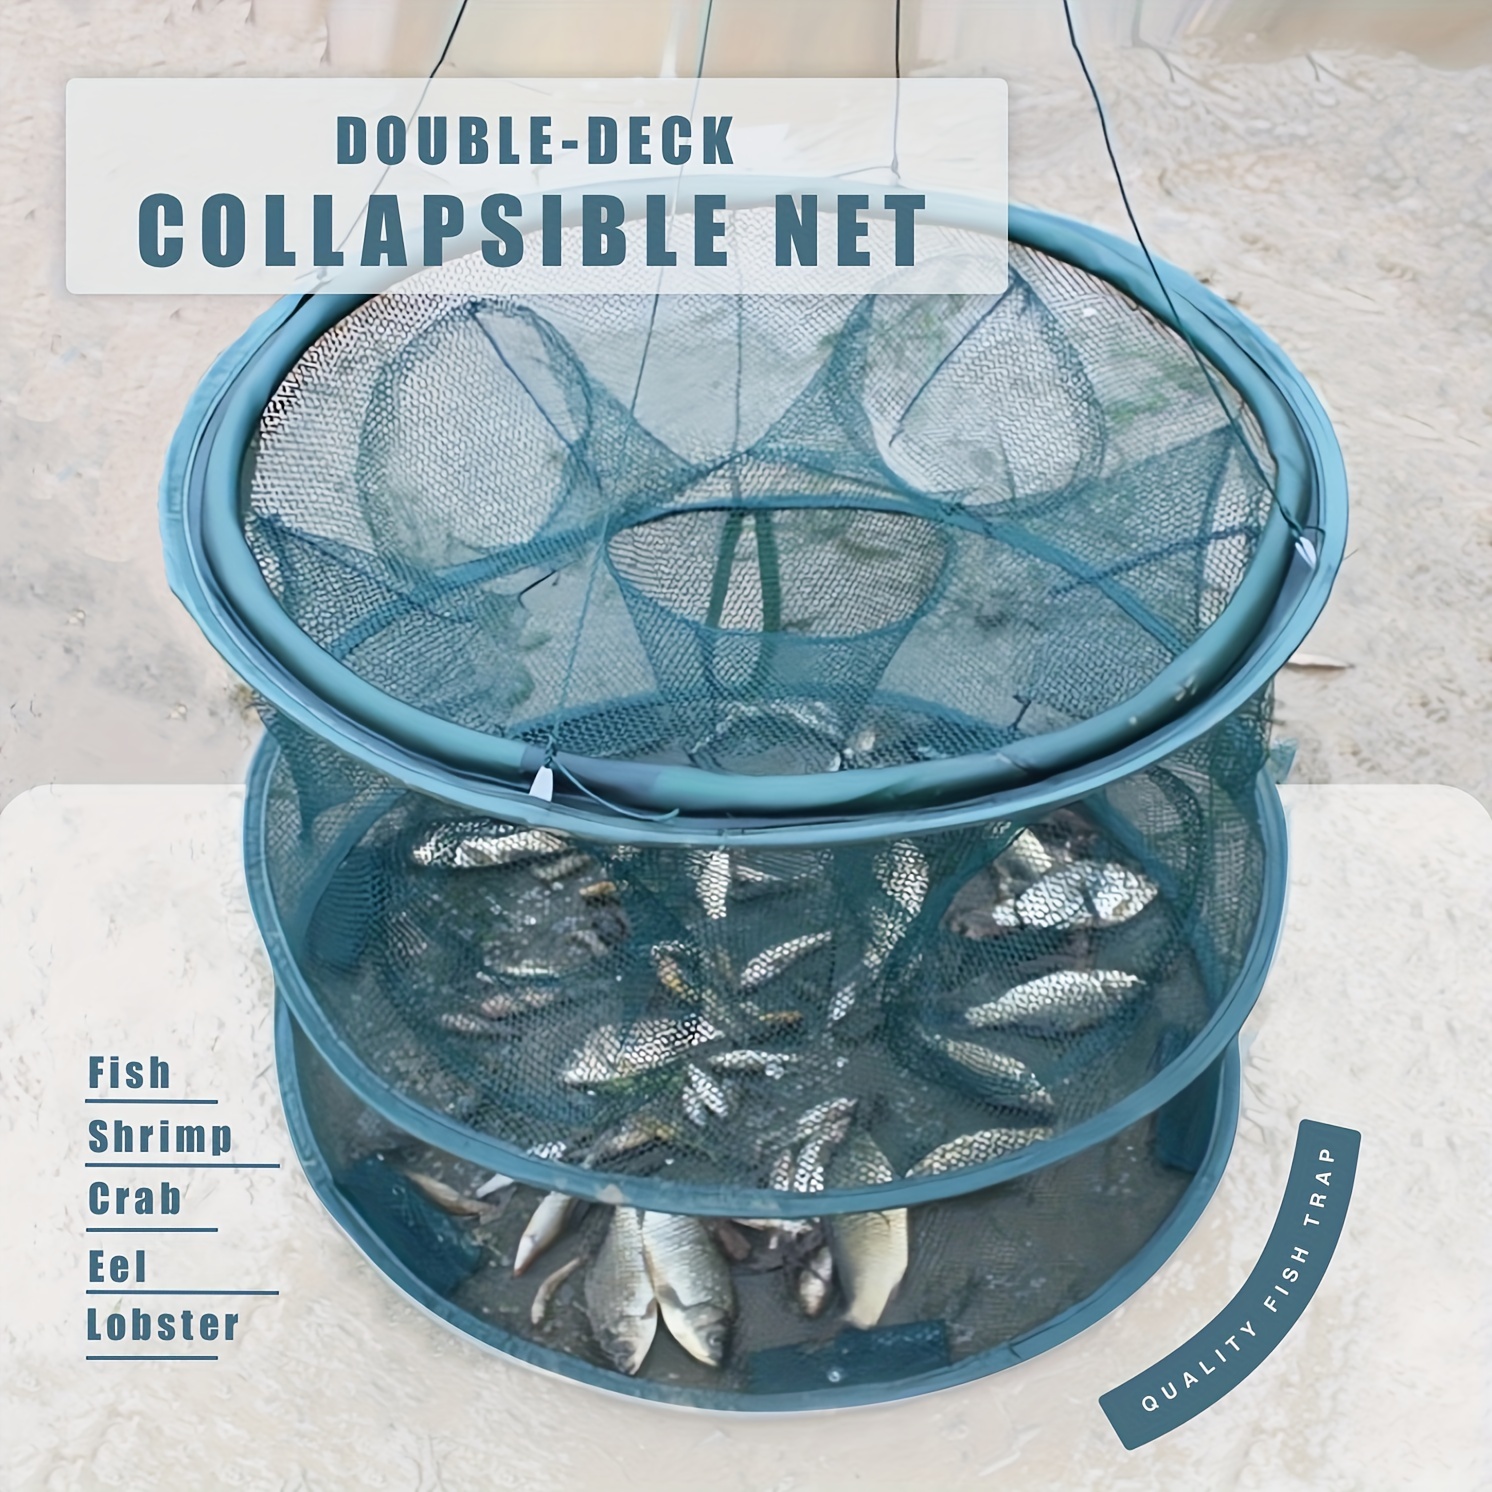 Double-deck Foldable Fishing Trap - Collapsible Fishing Net For Catching  Crab, Lobster, Crawfish, And Shrimp, Foldable Versatile Aquatic Cage With 7  H